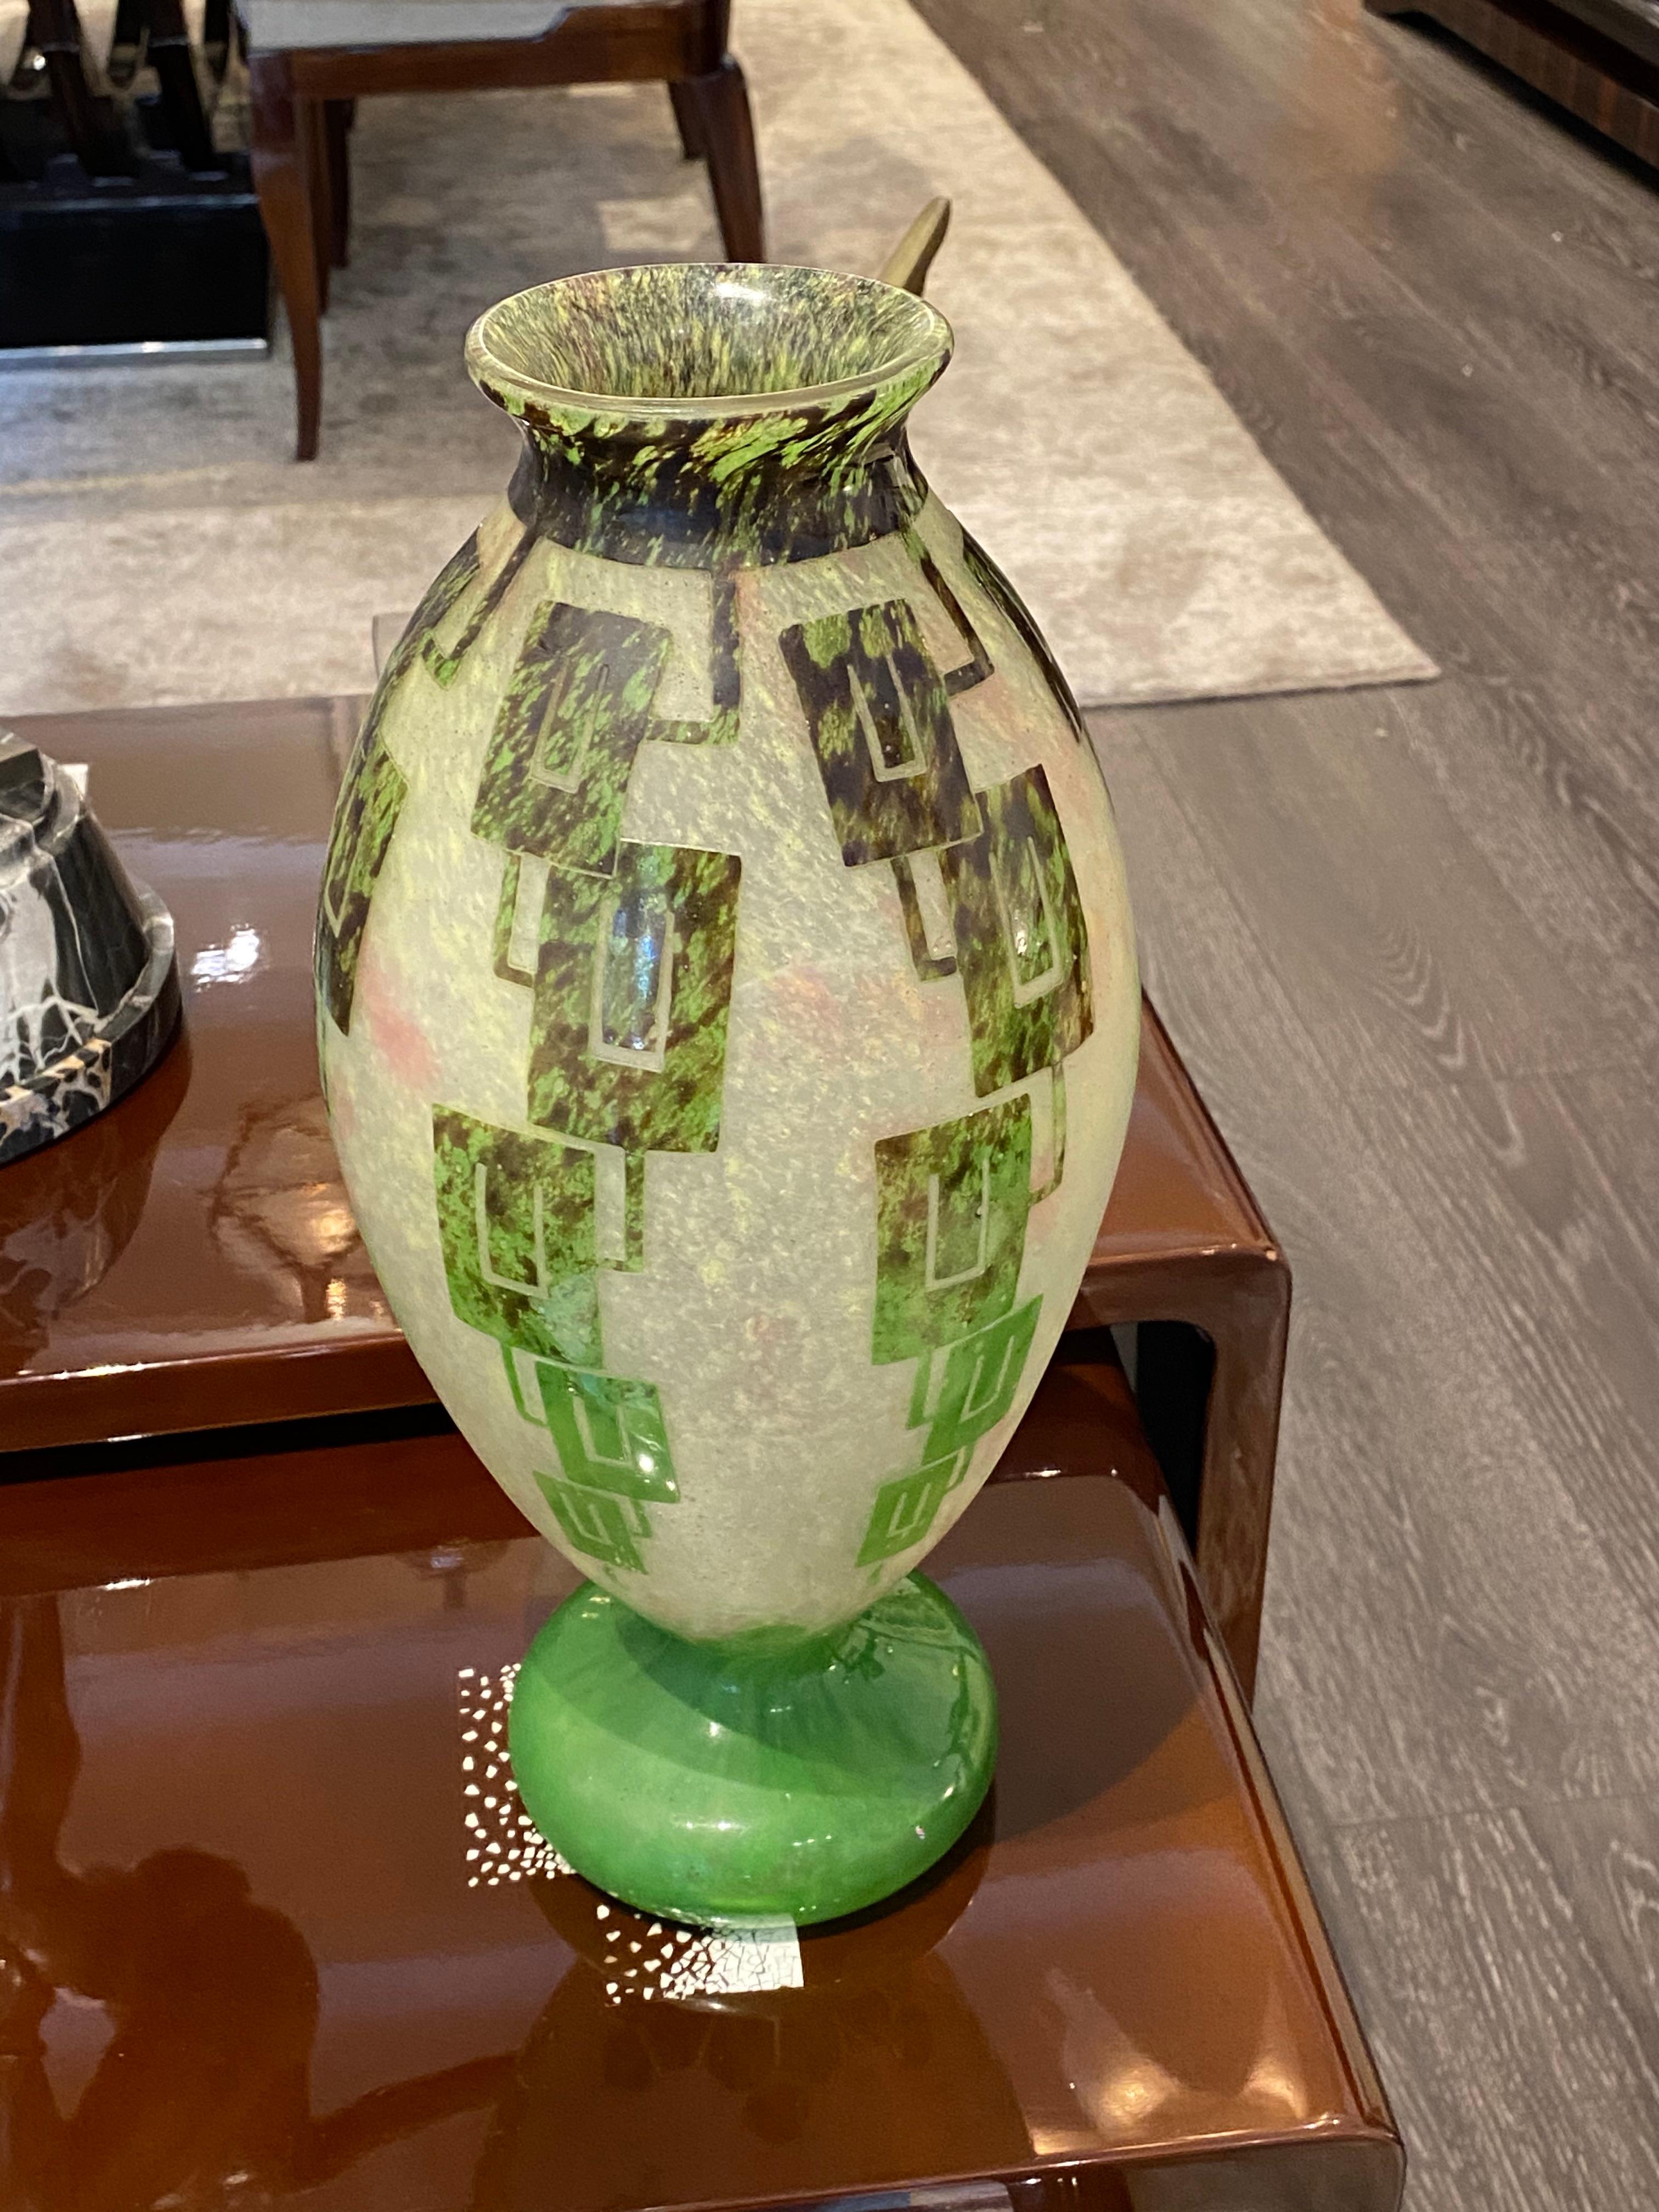 A rare Art Deco Mottled opalescent white, and pink colored glass vase, overlaid with green and black with an acid-etched and wheel carved to the Frenes pattern by Le Verre Francais under Charles Schneider creative design.
Made in France circa